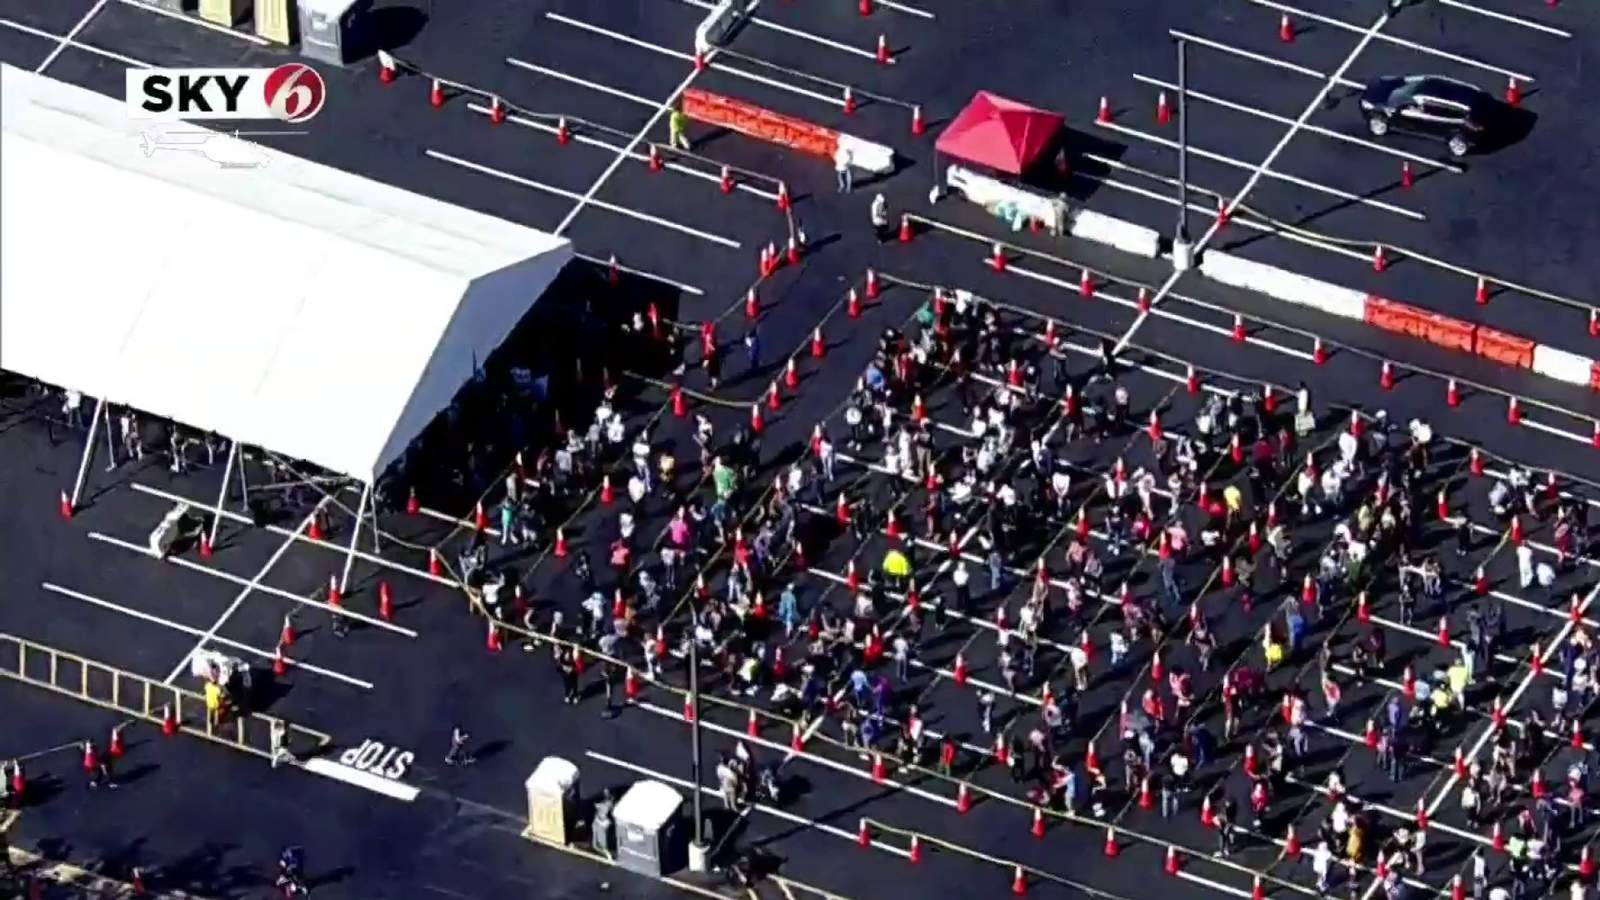 Orlando’s FEMA-backed vaccine site reaches capacity early on 1st day of 16+ vaccine eligibility